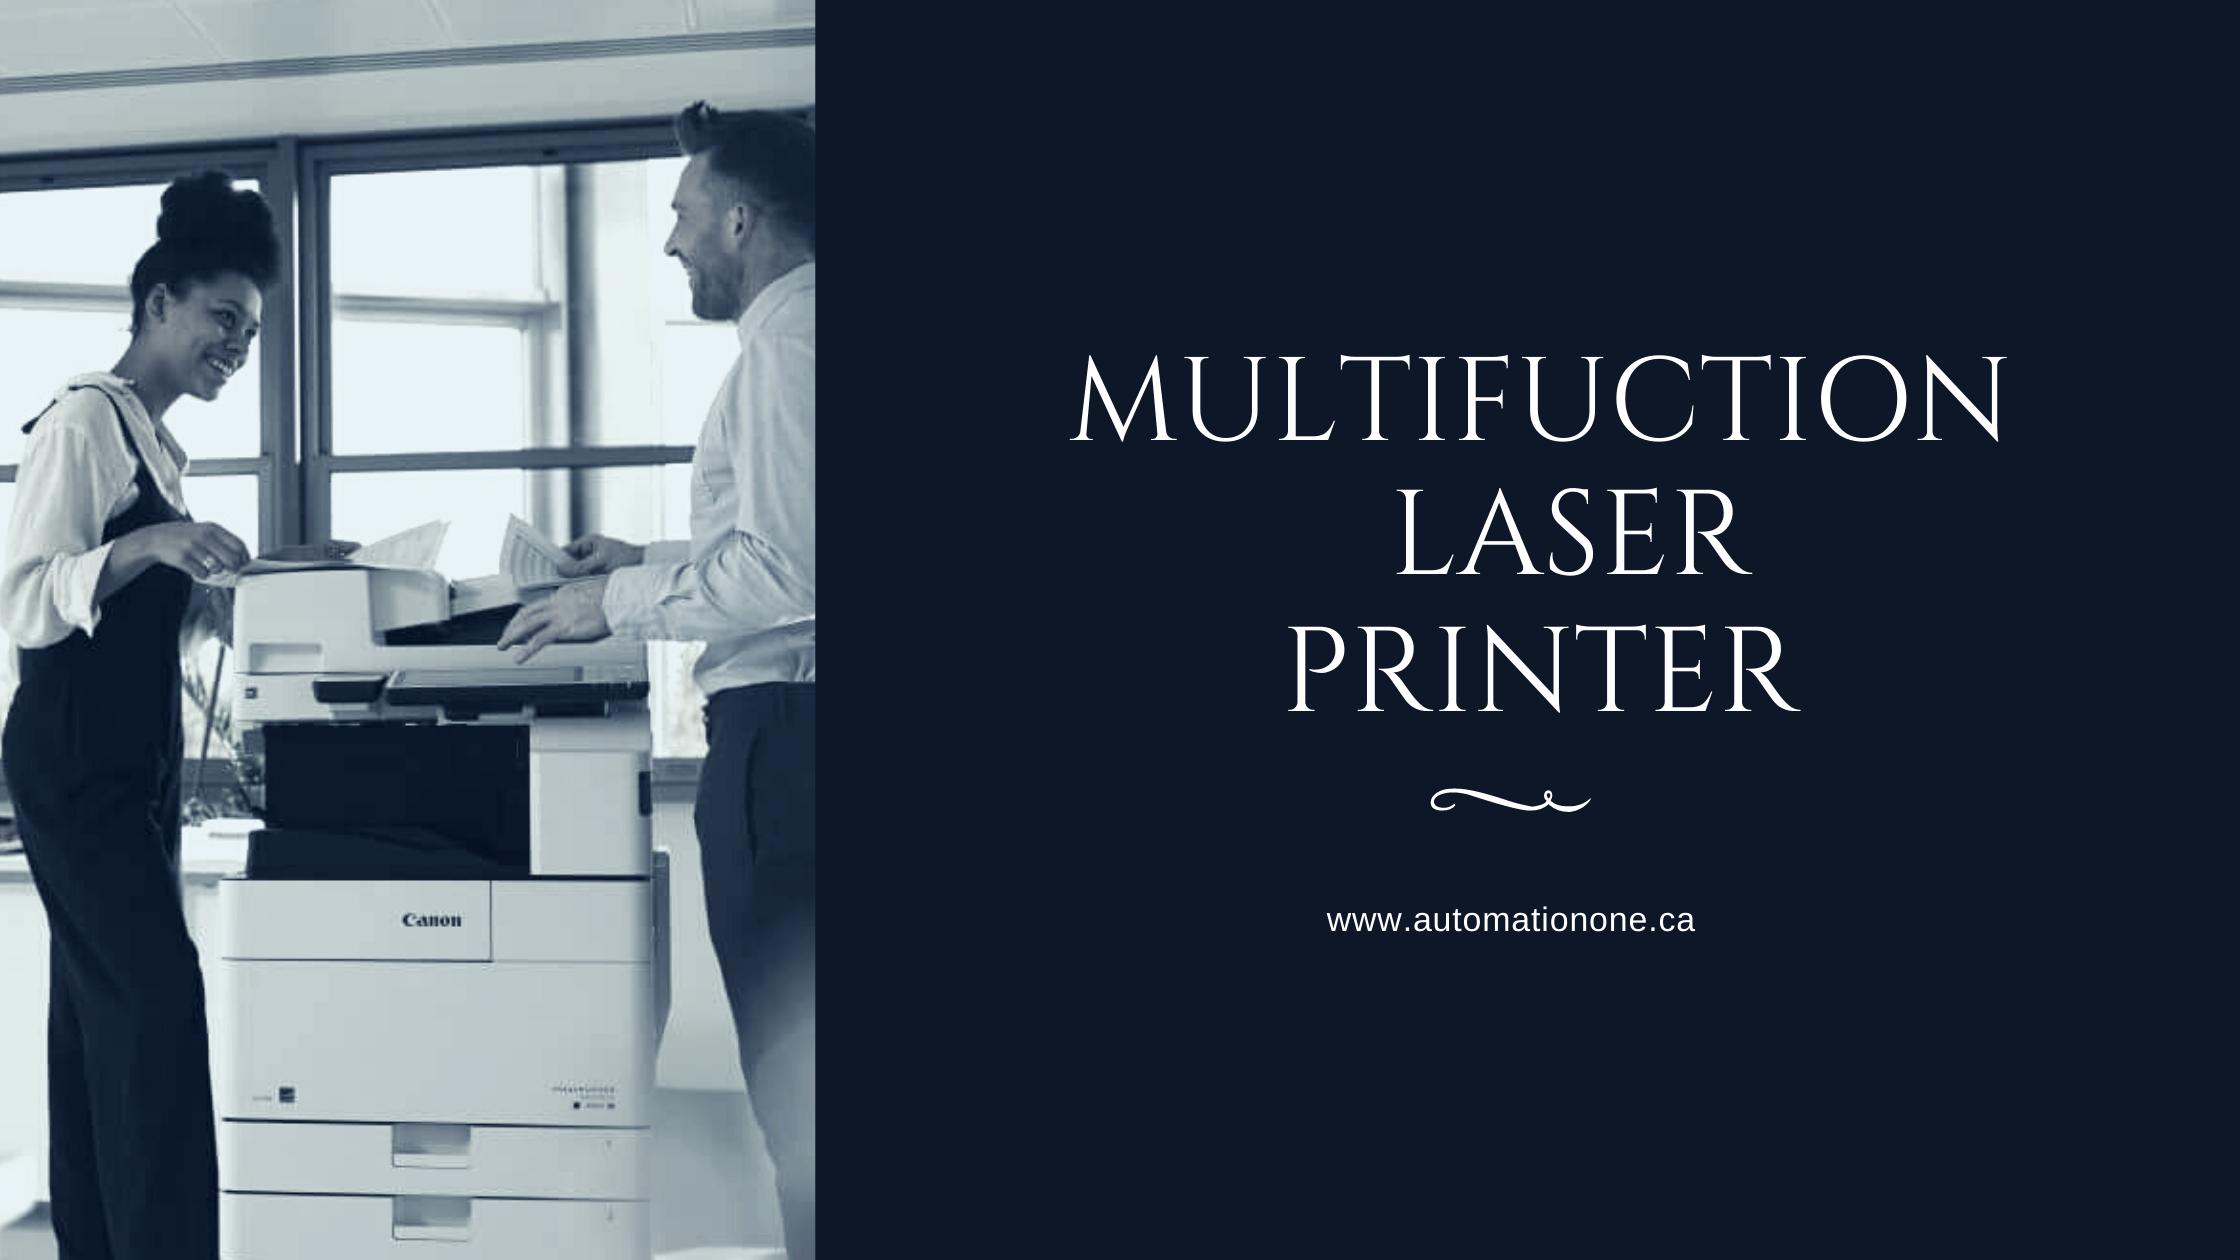 Why Do Successful Companies Prefer the Multifunction Laser Printer?